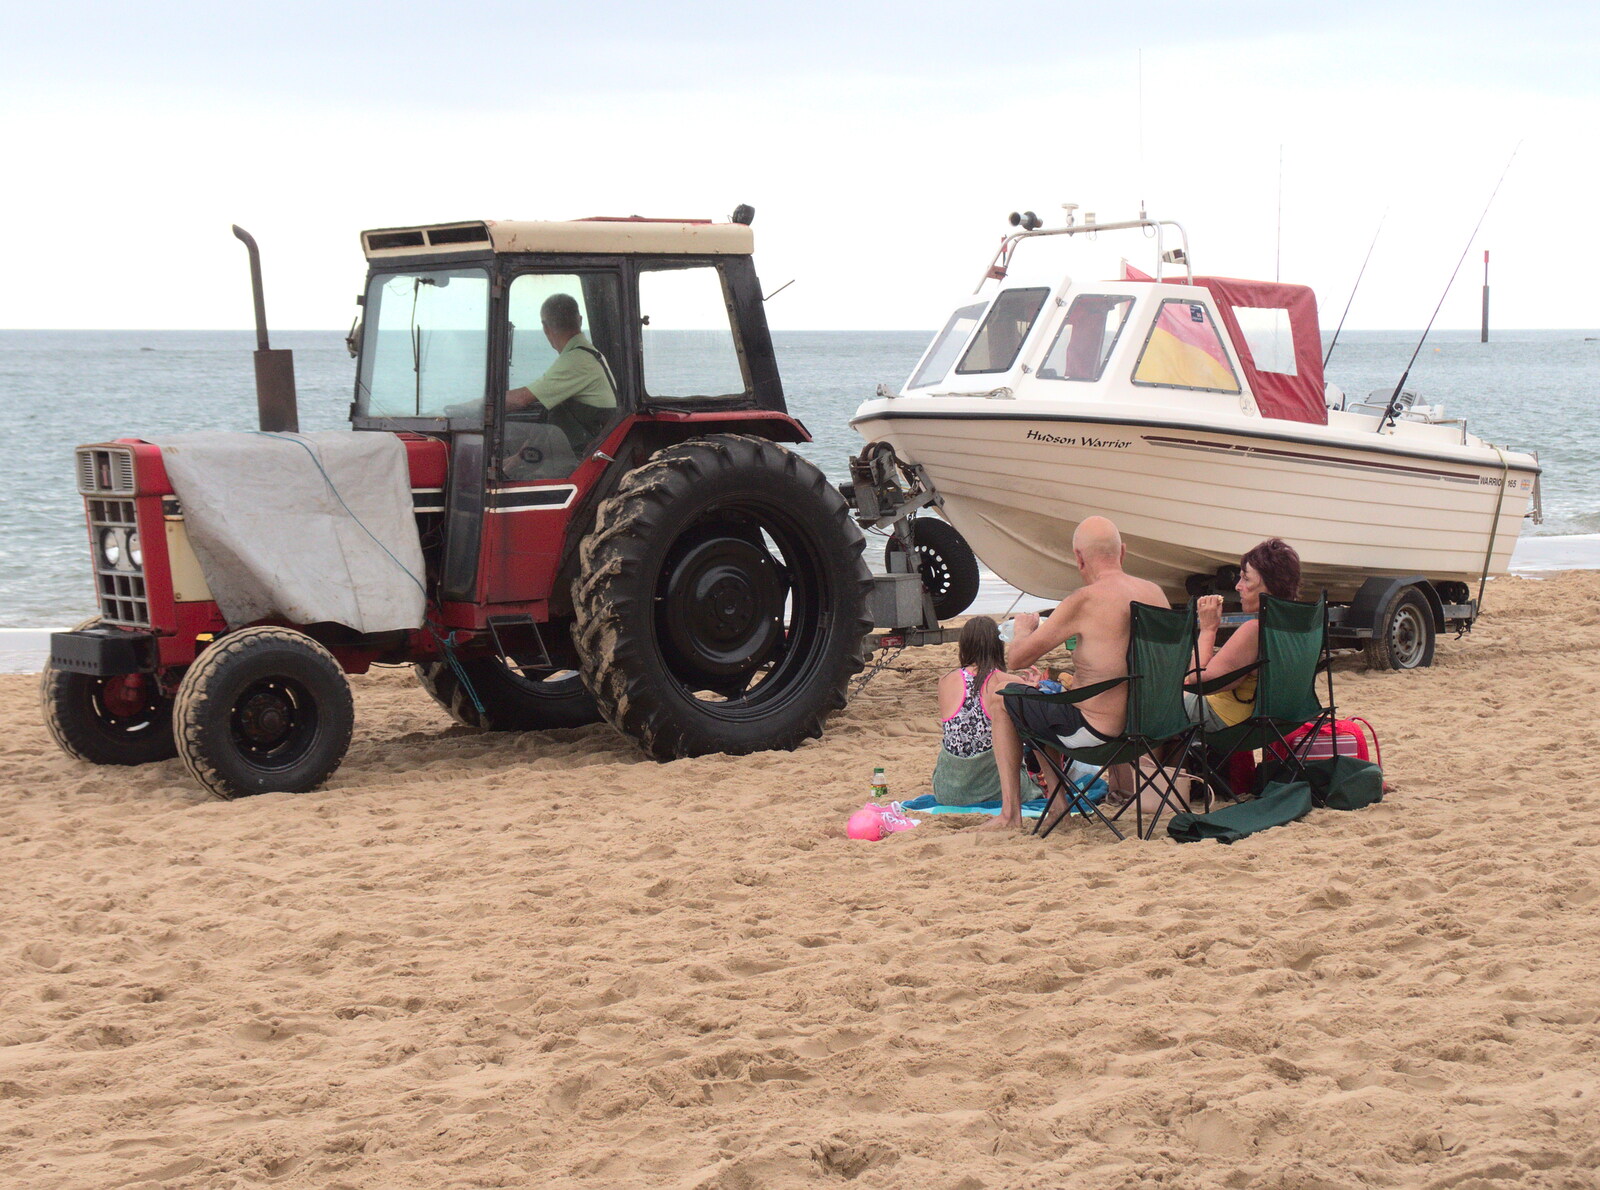 Optimistic sunbathers and a tractor towing a boat from A Wet Day at the Beach, Sea Palling, Norfolk - 16th July 2017